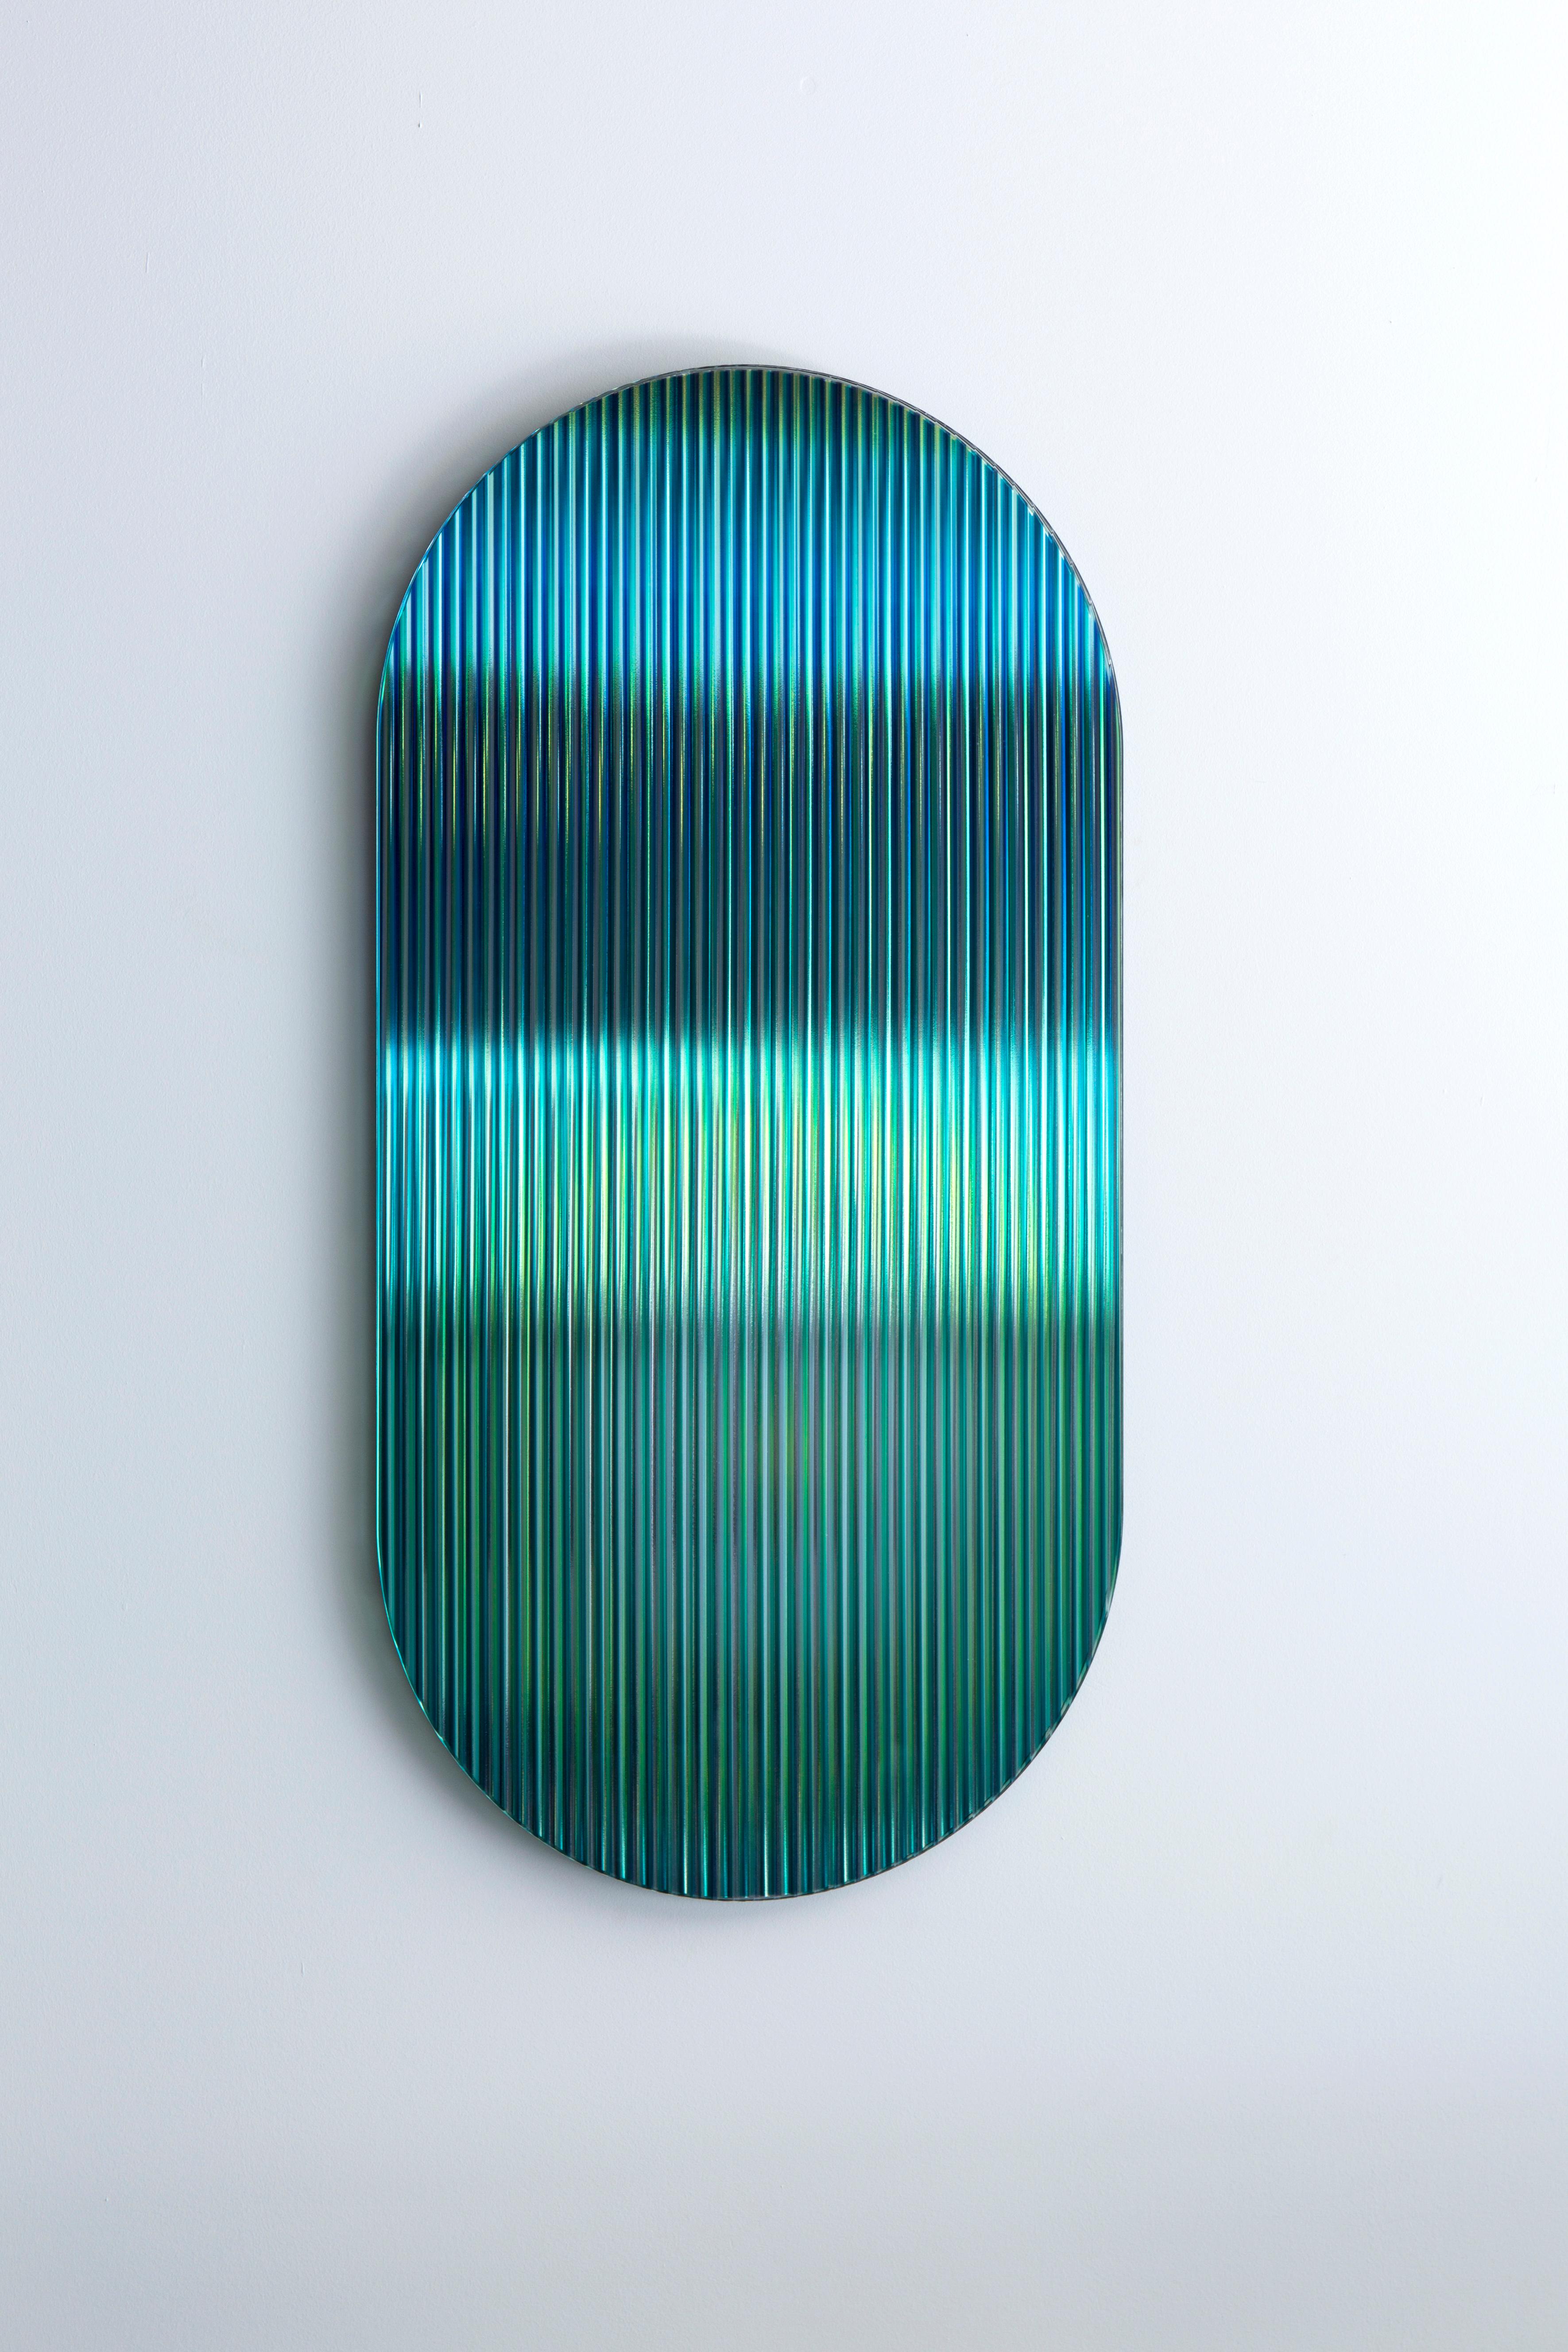 Hand-Crafted Color Shift Panel Trichroic Green with Glass and Color Sublimated Mirror For Sale